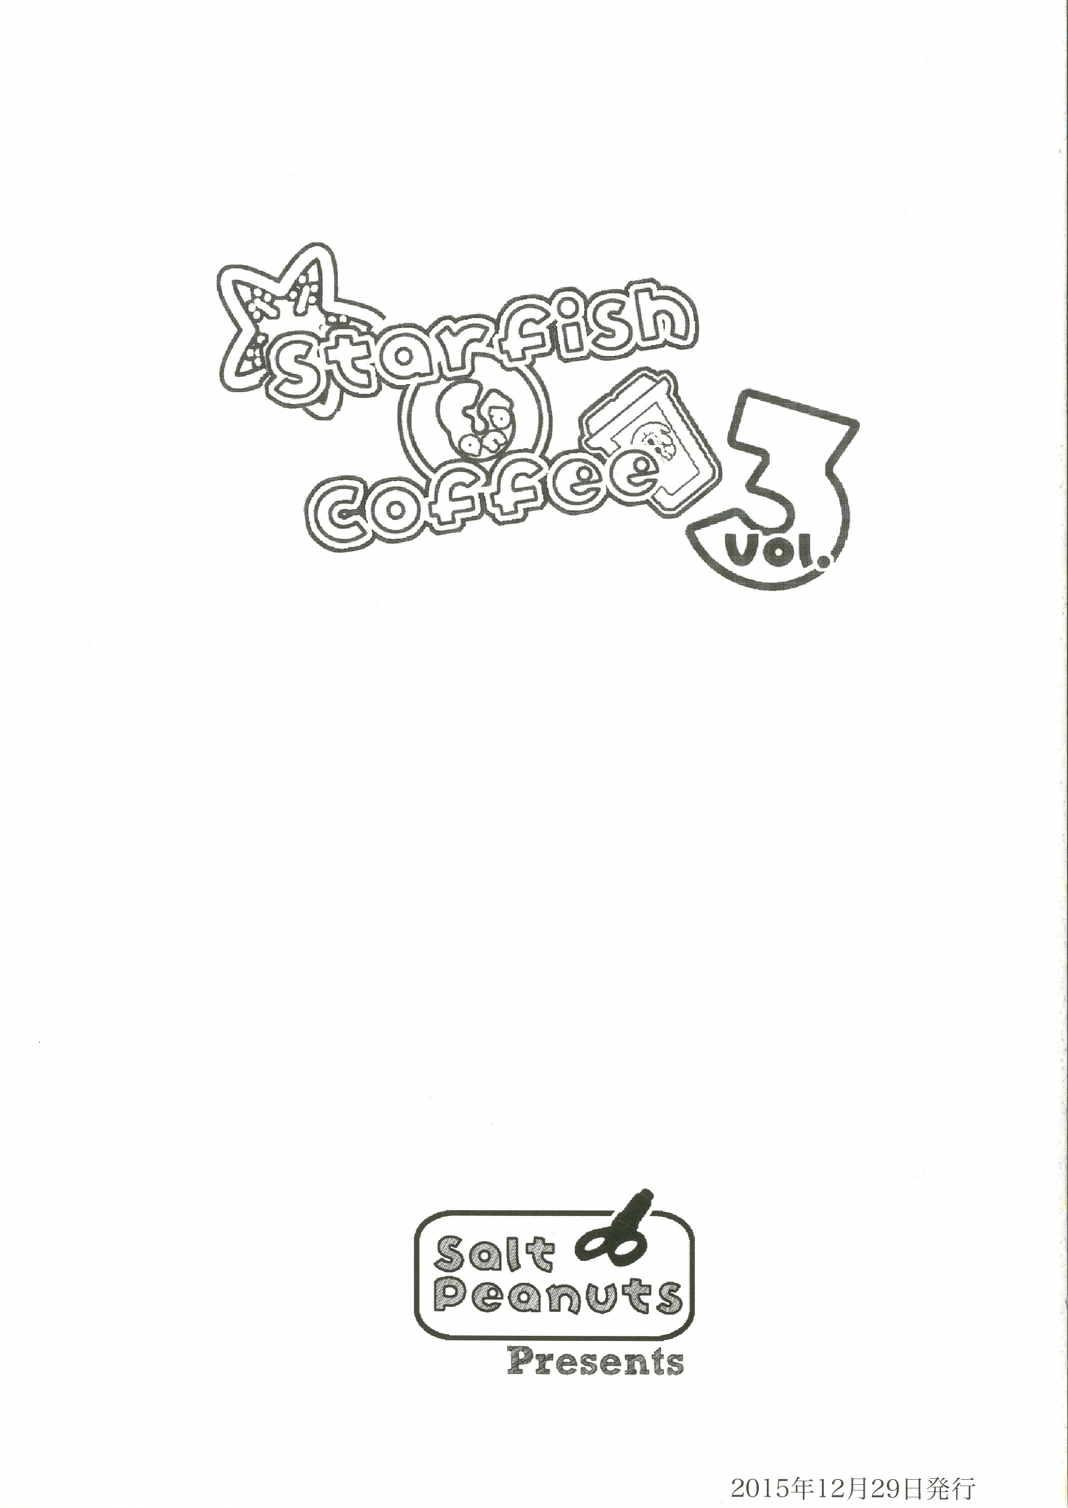 Blowjobs Starfish and Coffee Vol. 3 - Nichijou Old Vs Young - Page 3